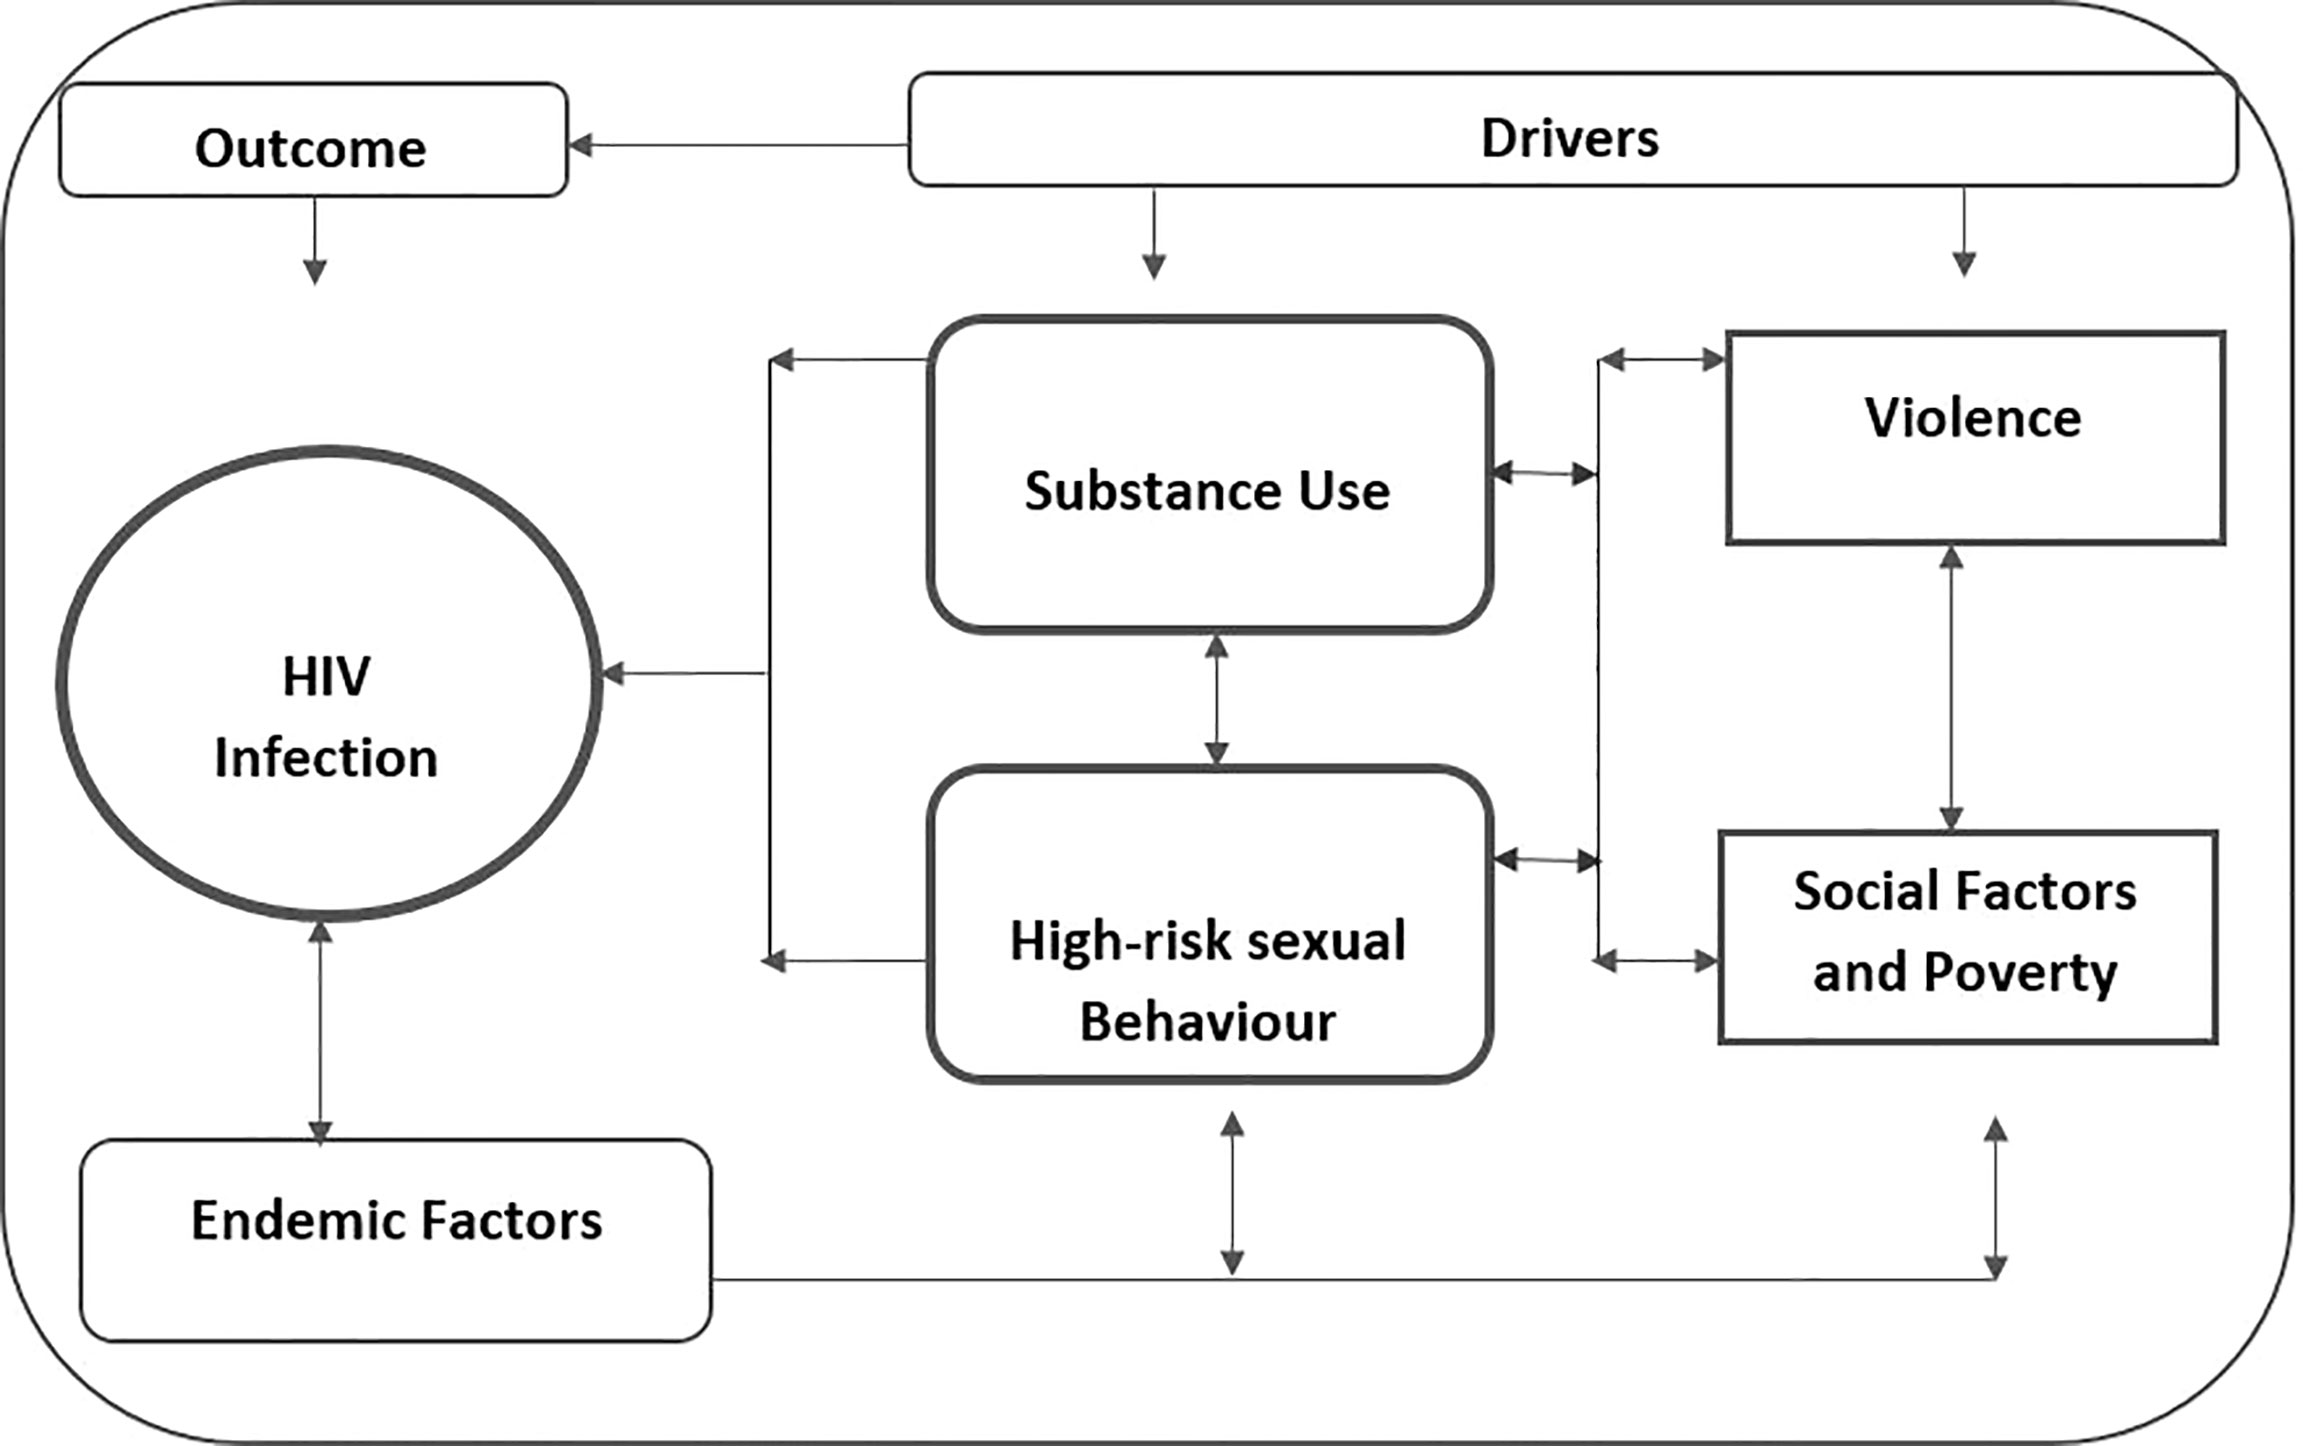 Frontiers The Syndemic of Substance Use, High-Risk Sexual Behavior, and Violence A Qualitative Exploration of the Intersections and Implications for HIV/STI Prevention Among Key Populations in Lagos, Nigeria picture image